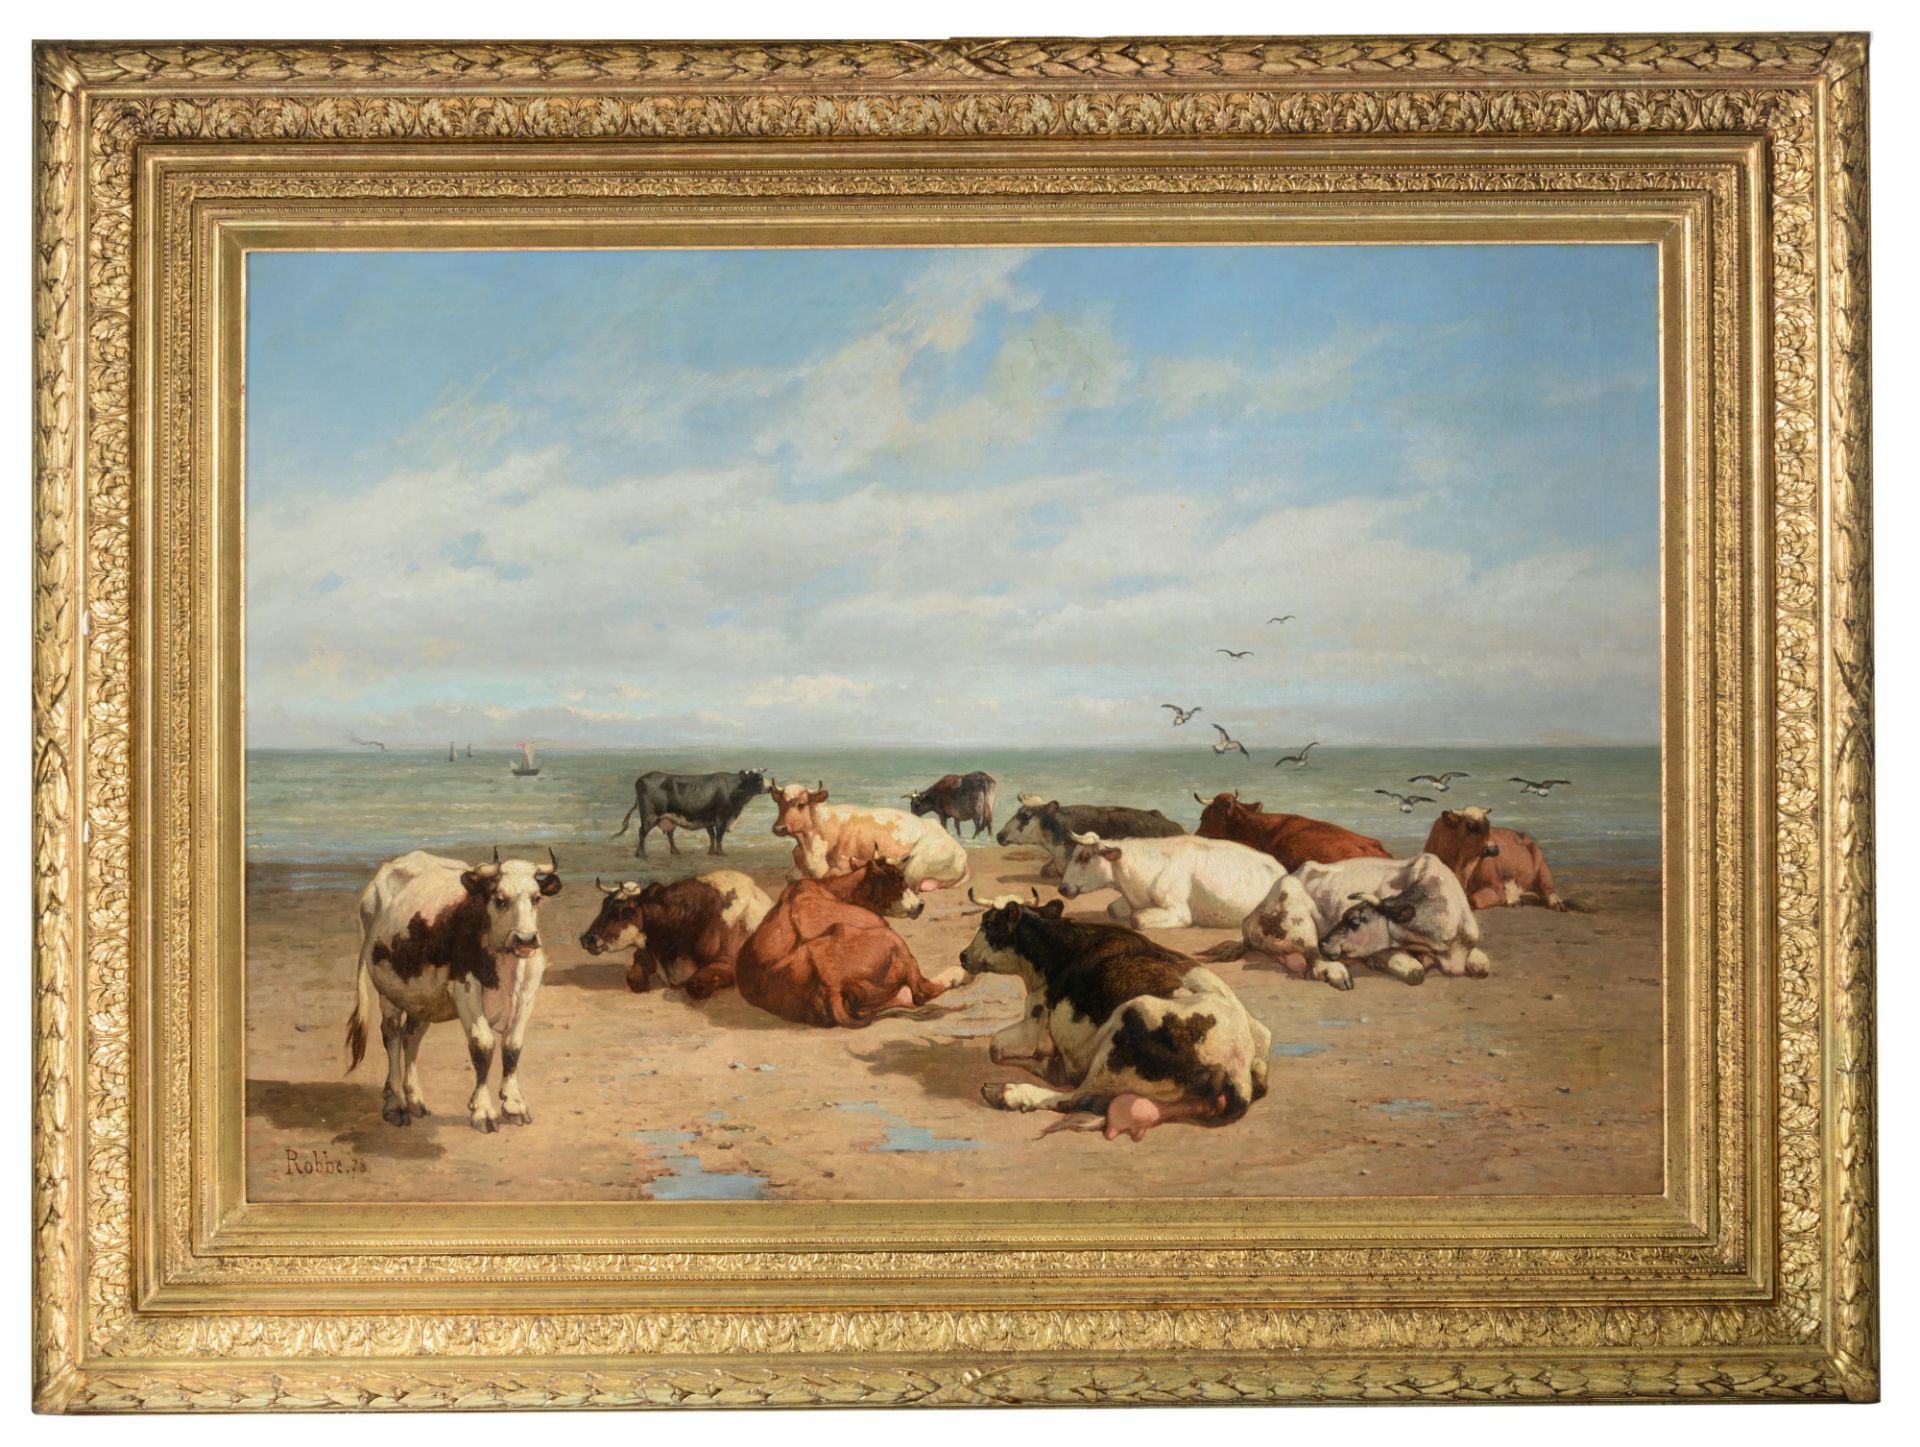 Robbe L. cows resting at the beach, dated (18)78, oil on canvas, 93 x 135 cm - Image 2 of 9